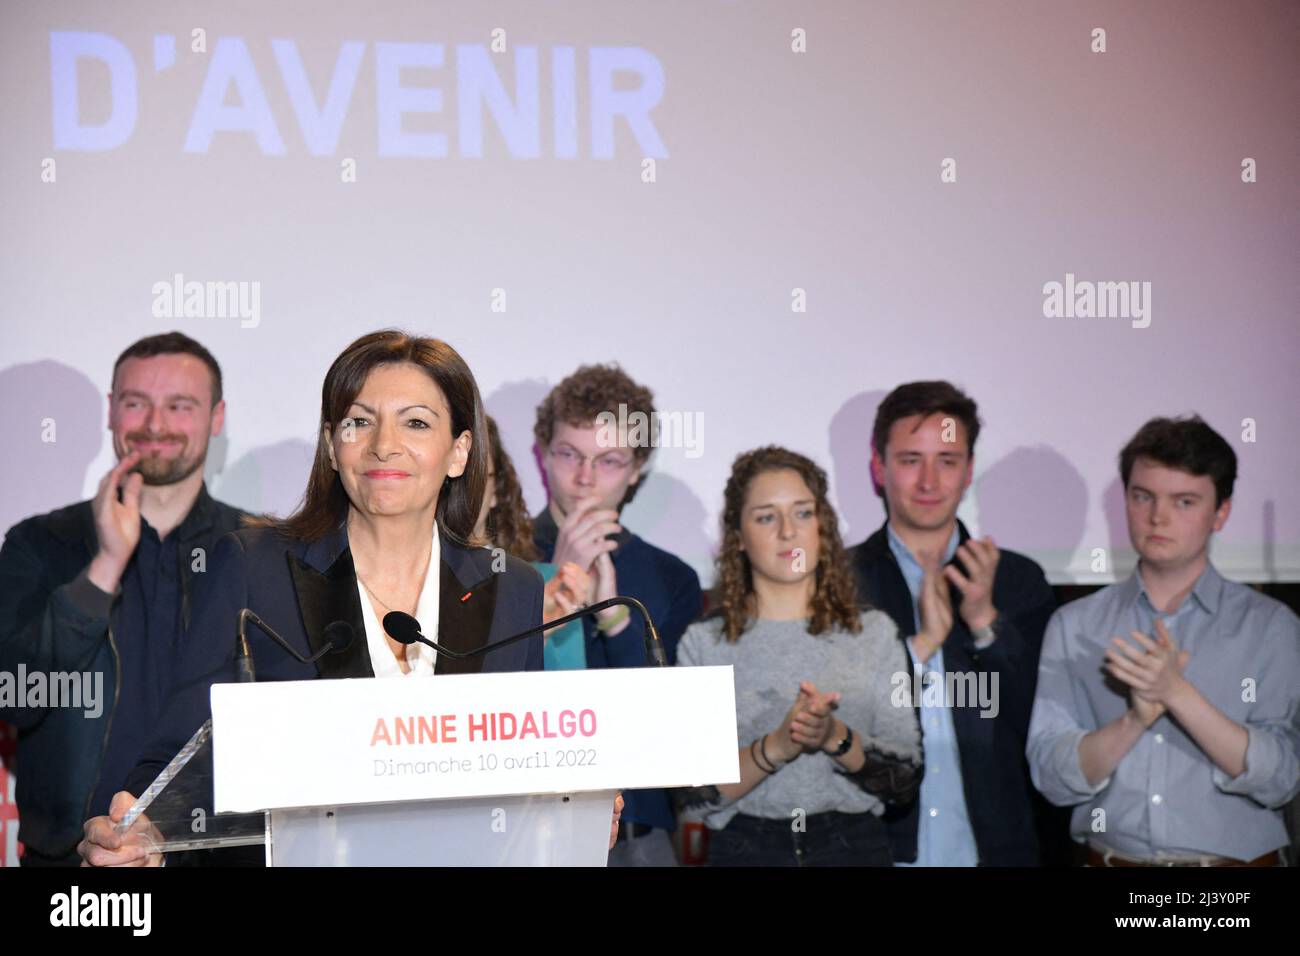 Paris, France. 10th Apr, 2022. French Socialist Party (PS) presidential candidate Anne Hidalgo addresses party supporters after the first results of the first round of the Presidential election at Poincon Paris in Paris, France on April 10, 2022. Photo by Jana Call MeJ/ABACAPRESS.COM Credit: Abaca Press/Alamy Live News Stock Photo